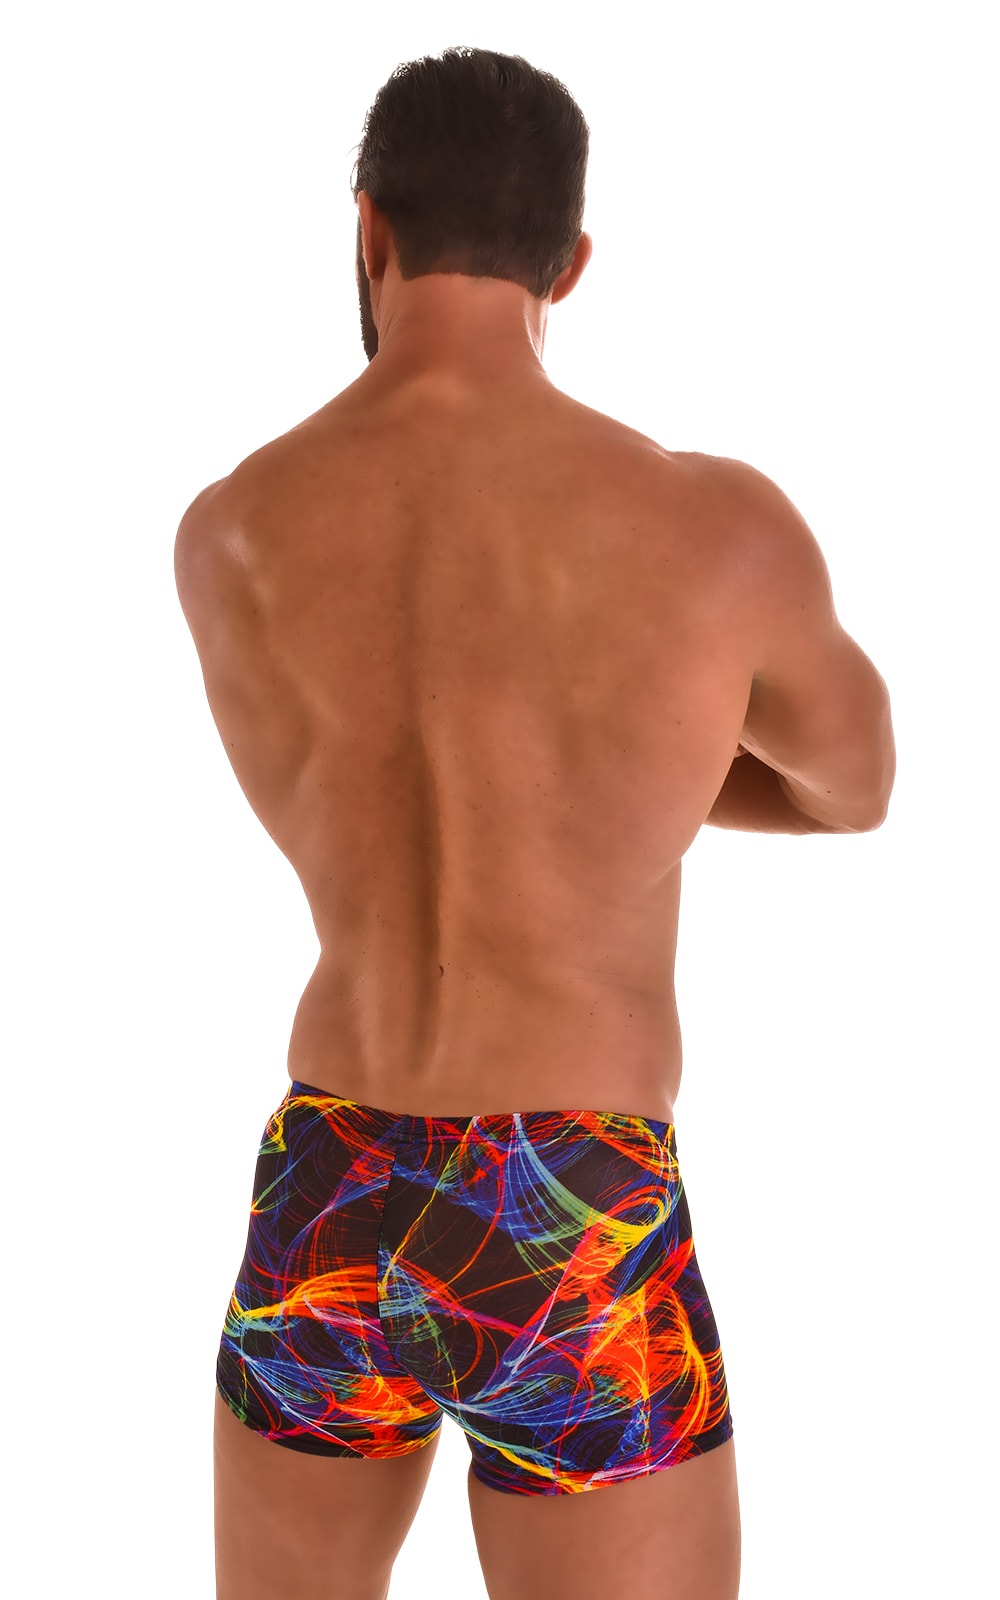 Square Cut Seamless Swim Trunks in Tan Through Rave Up, Rear View